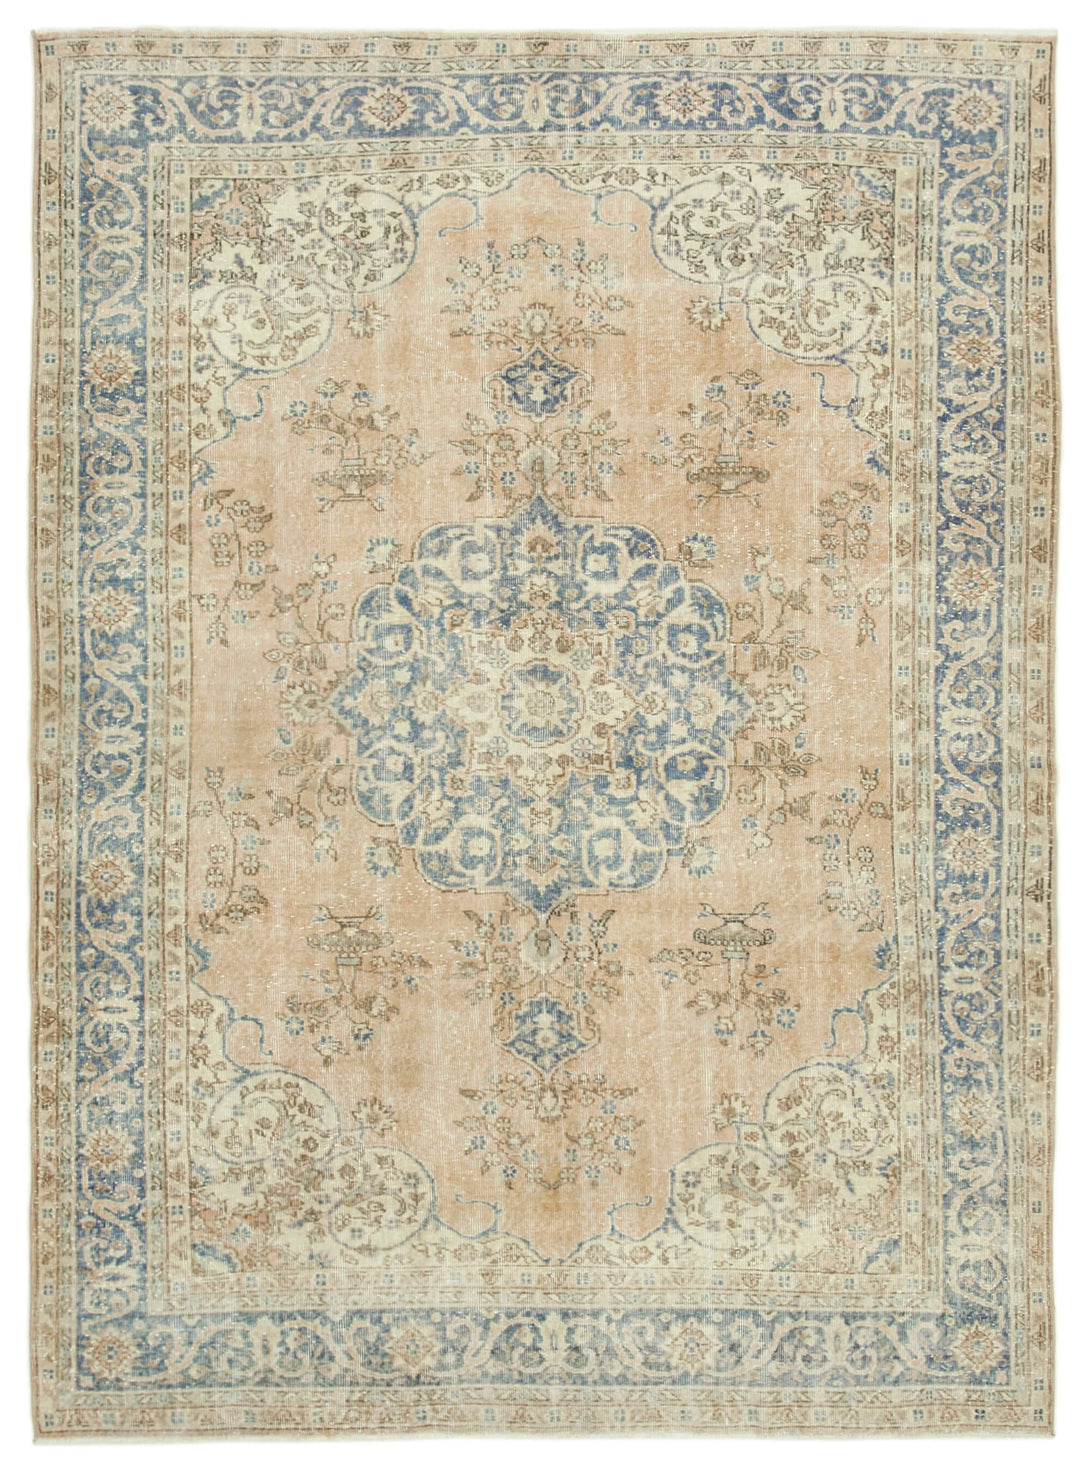 Handmade White Wash Area Rug > Design# OL-AC-38771 > Size: 7'-7" x 10'-6", Carpet Culture Rugs, Handmade Rugs, NYC Rugs, New Rugs, Shop Rugs, Rug Store, Outlet Rugs, SoHo Rugs, Rugs in USA